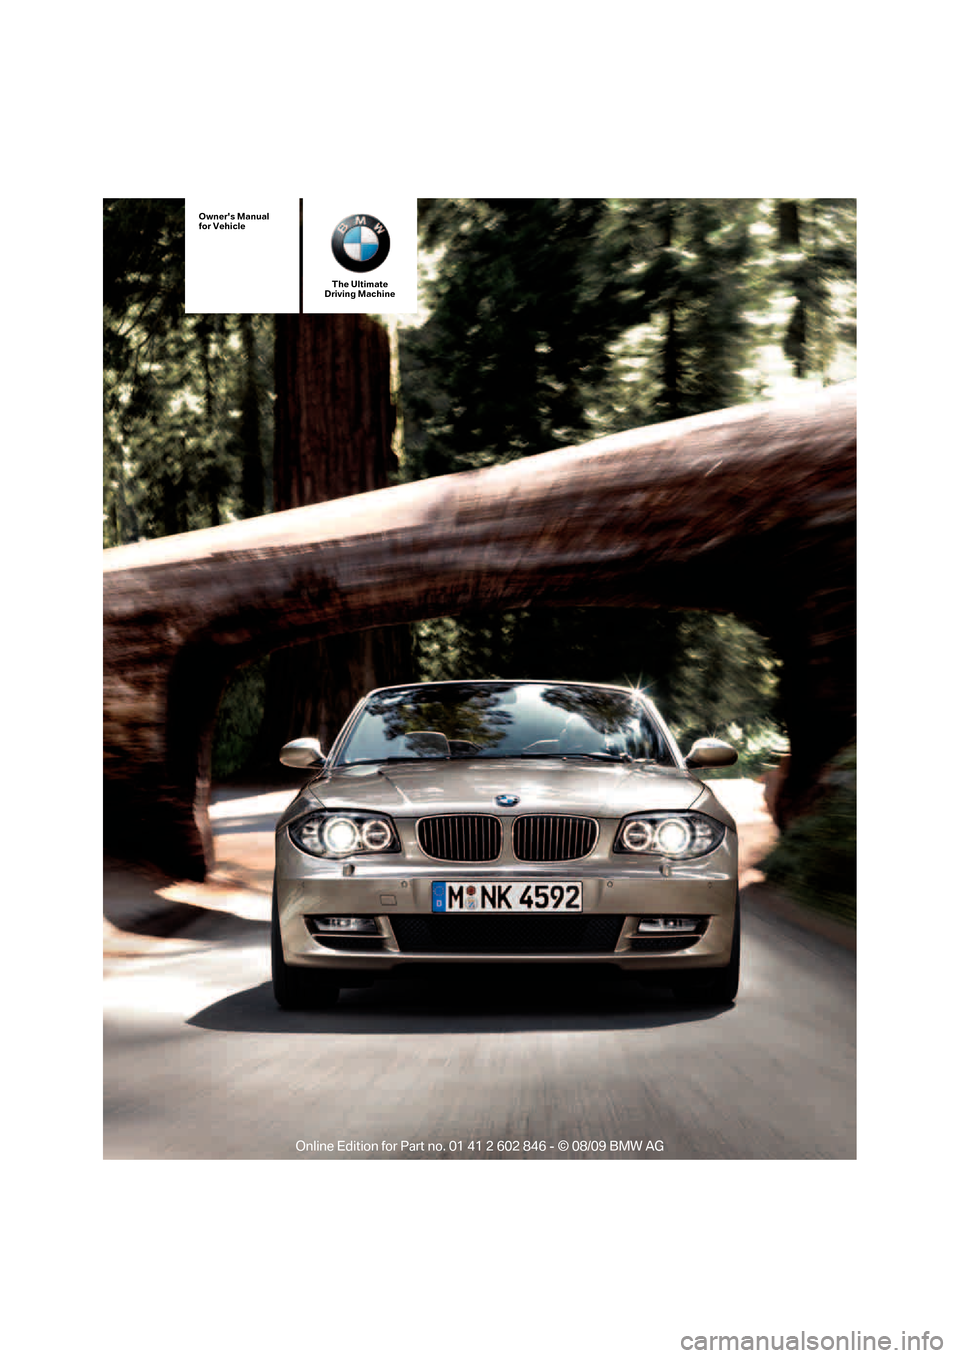 BMW 128I 2010 E81 Owners Manual The Ultimate
Driving Machine
Owners Manual
for Vehicle 